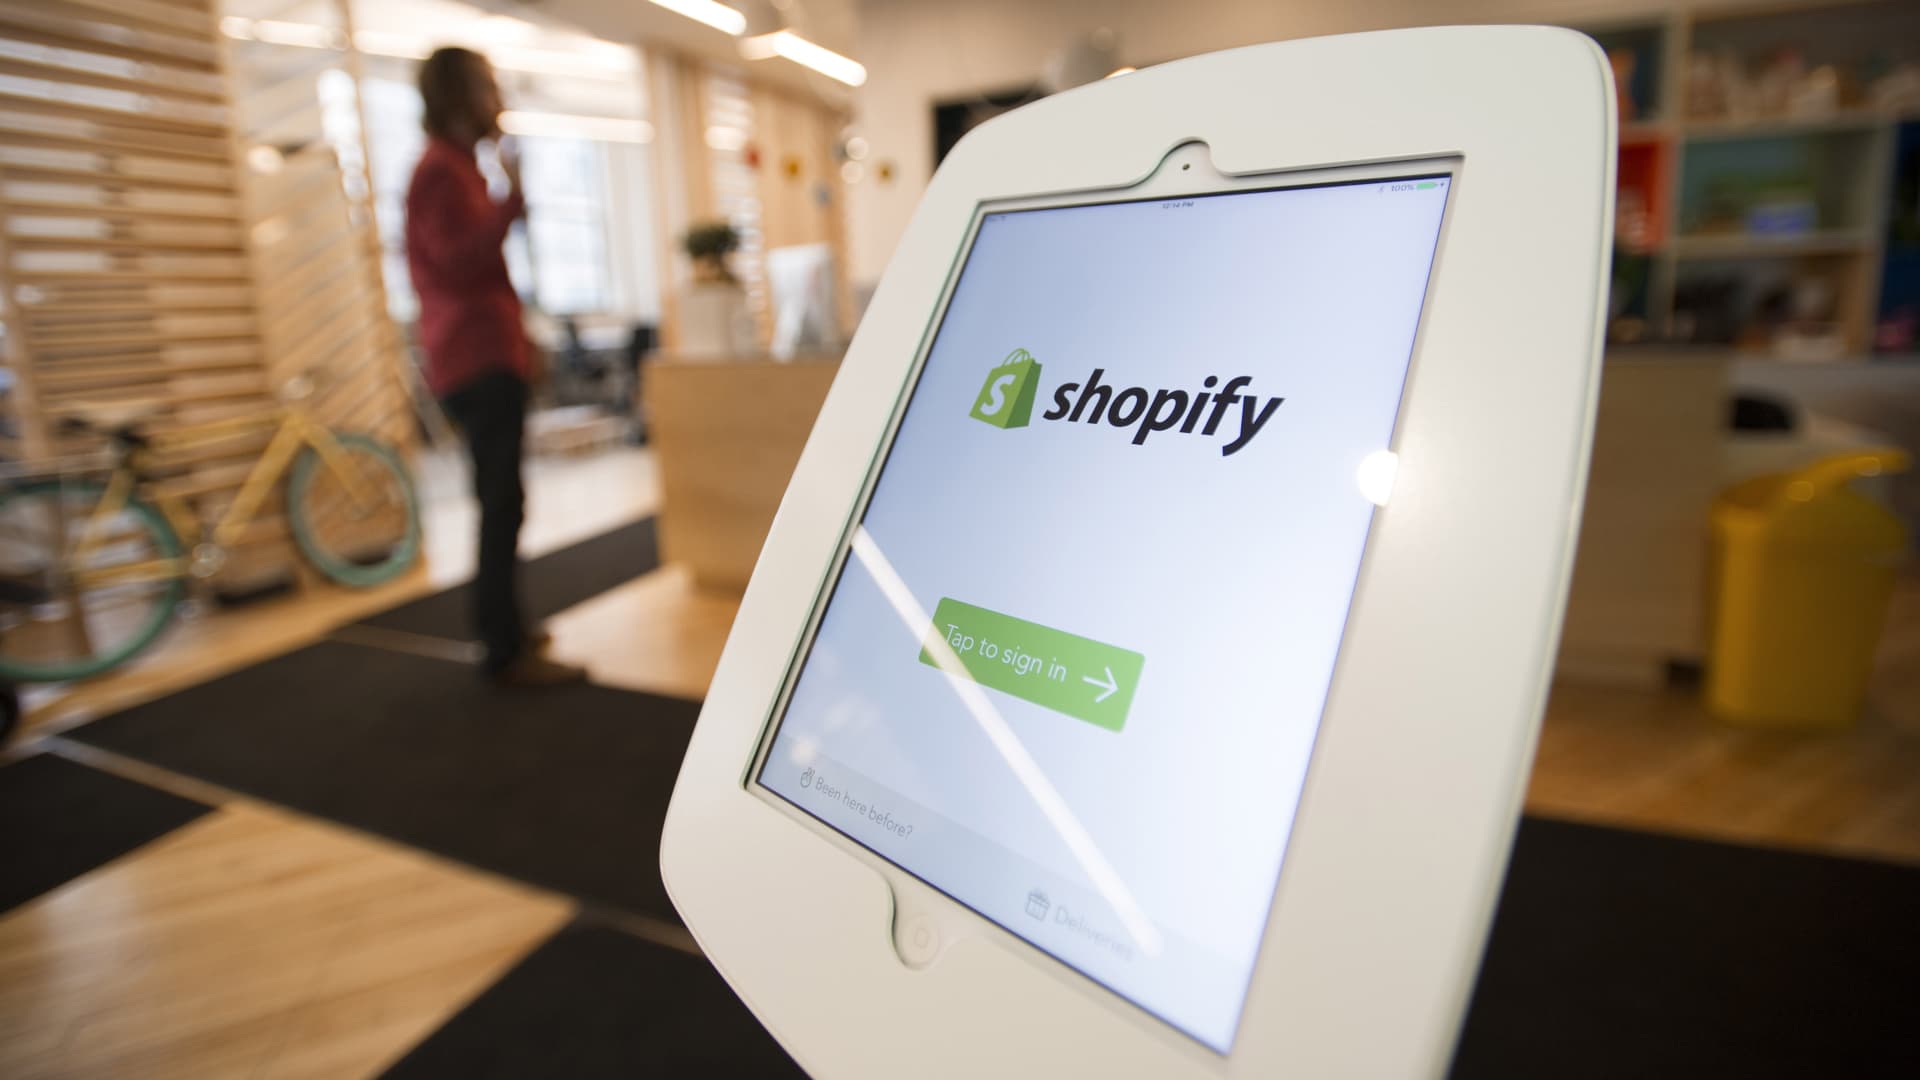 An Apple iPad with the Shopify app is displayed at the entrance to the company's headquarters in Toronto, Ontario.